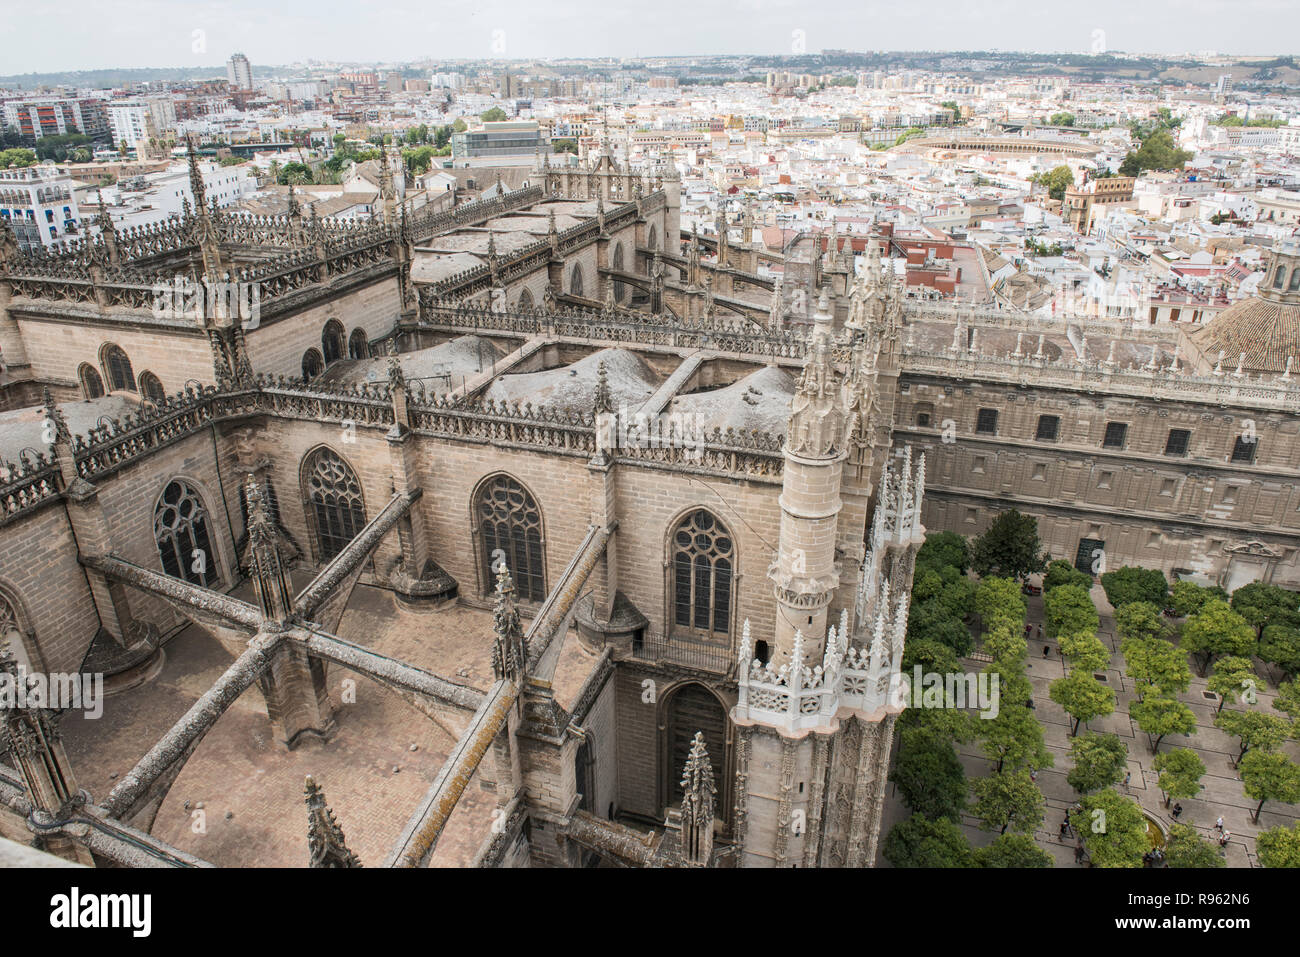 Image of Seville Cathedral is seen on this picture. Seville Cathedral is an old cathedral in Seville, Spain. It boasts of magnificient architecture da Stock Photo